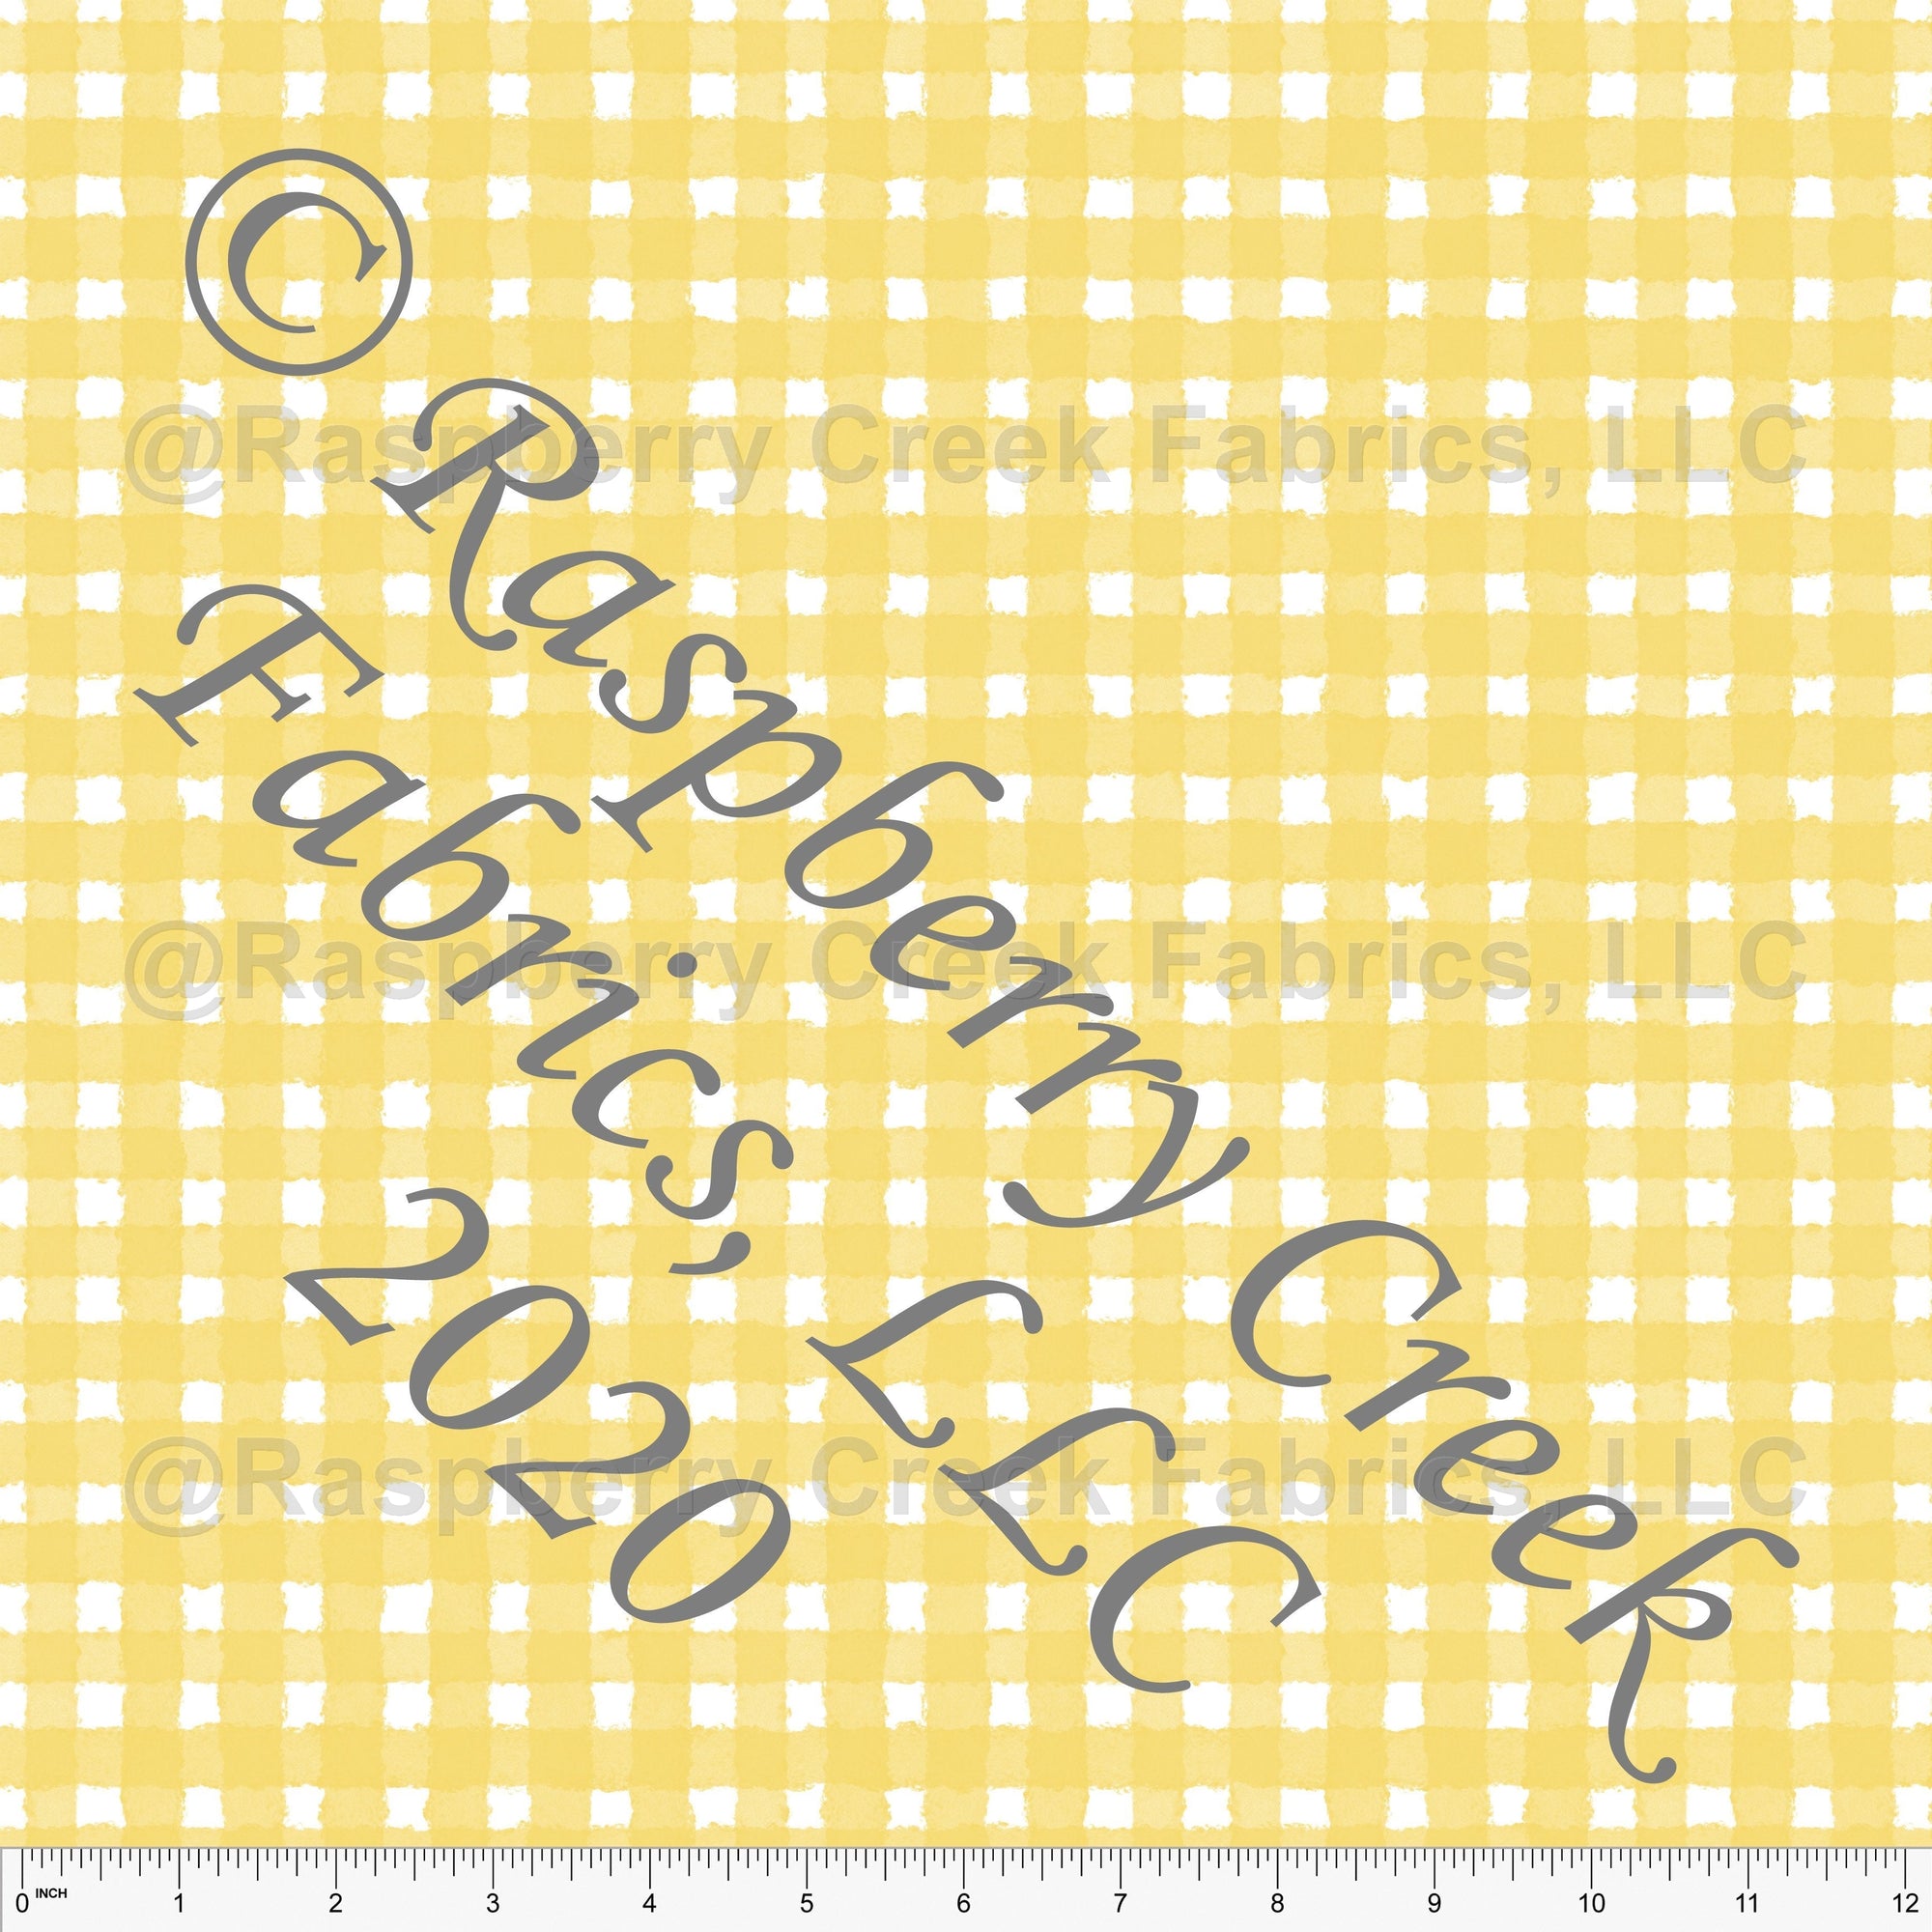 Yellow and White Painted Check Gingham, By Bri Powell for Club Fabrics Fabric, Raspberry Creek Fabrics, watermarked